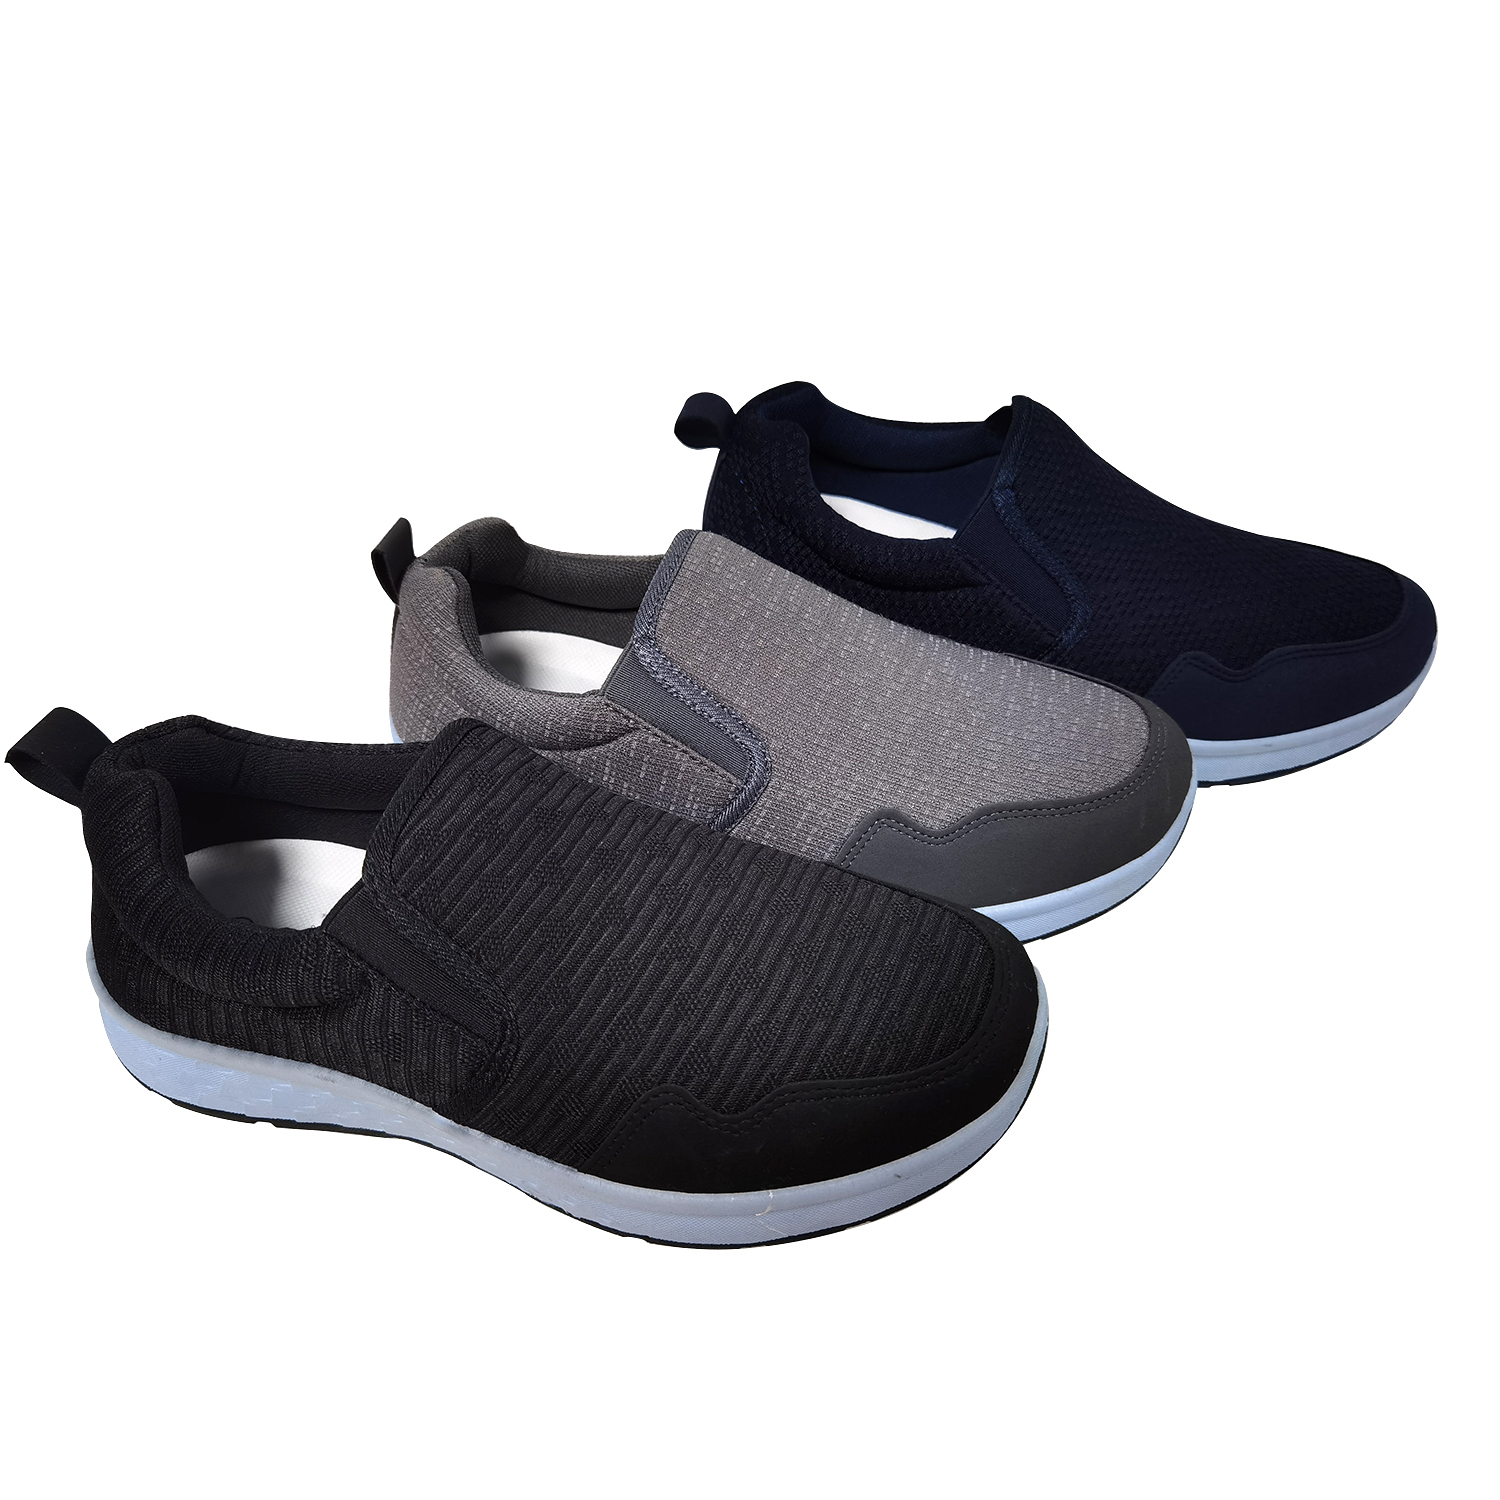 Men's Casual Shoes Slip On Walking Shoes